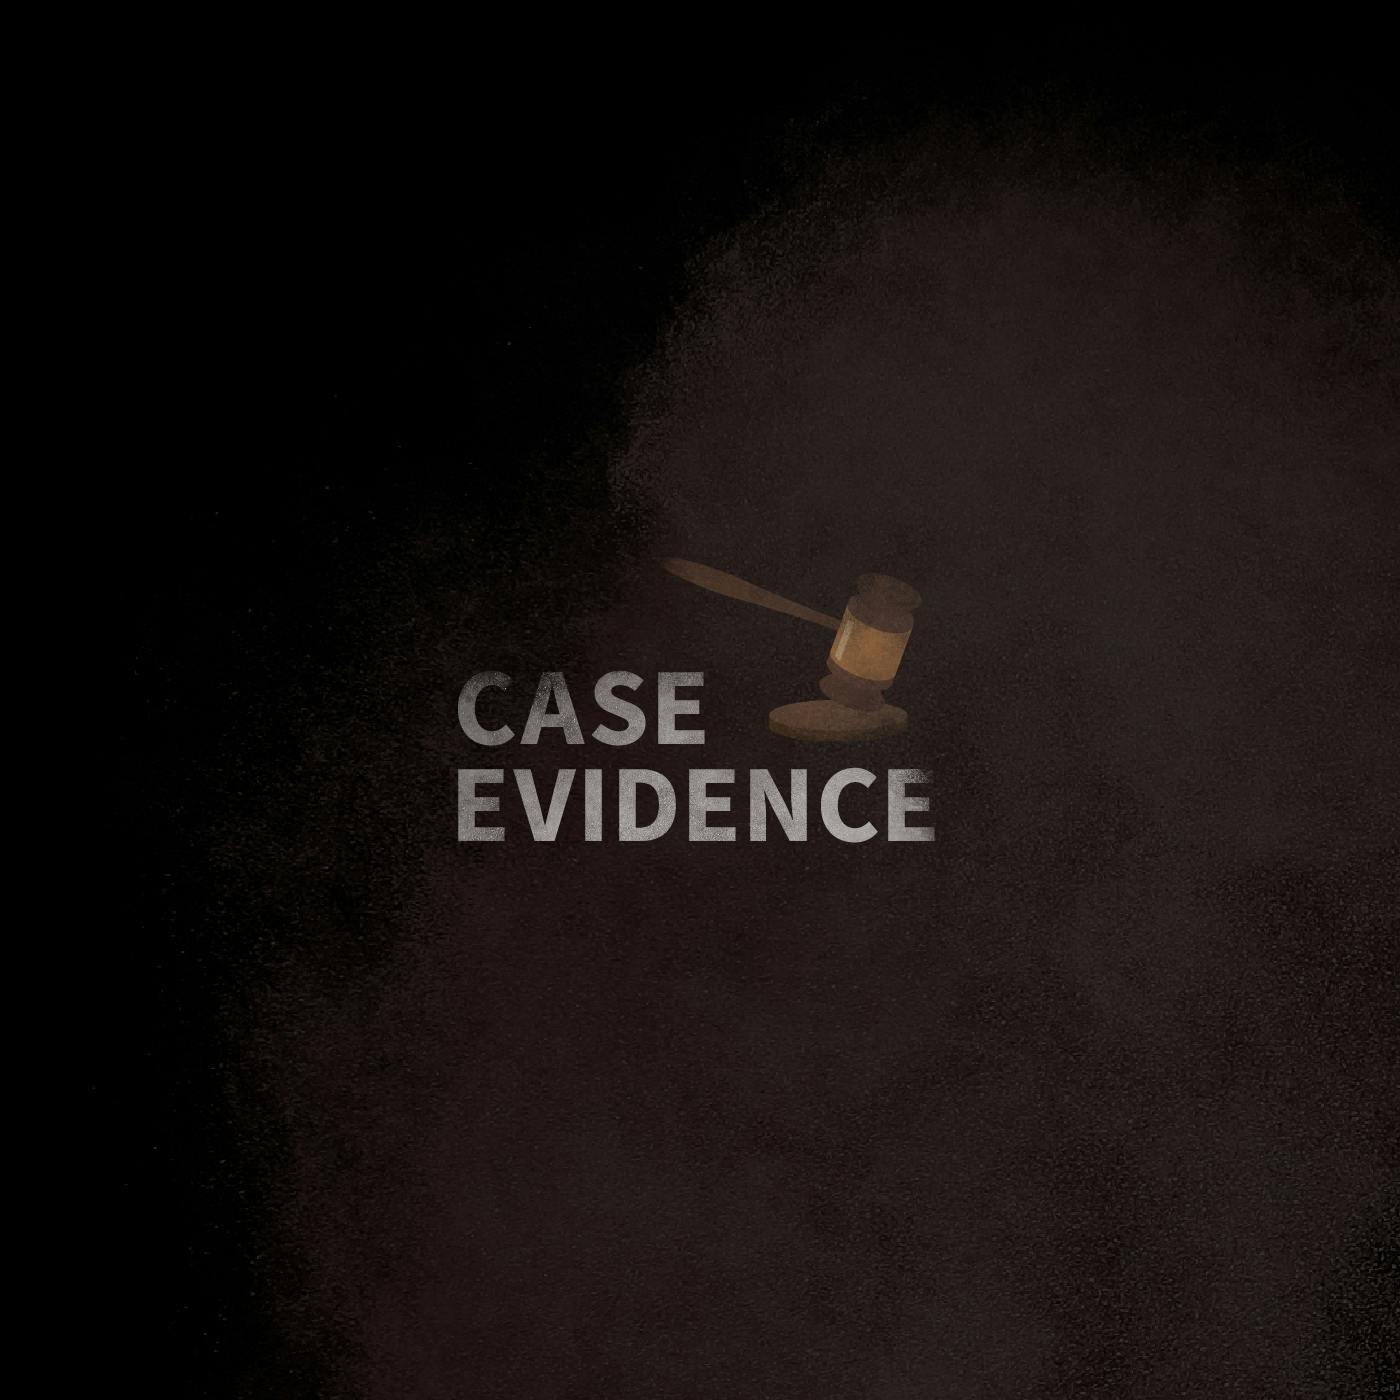 Case Evidence 04.03.17 by Tenderfoot TV